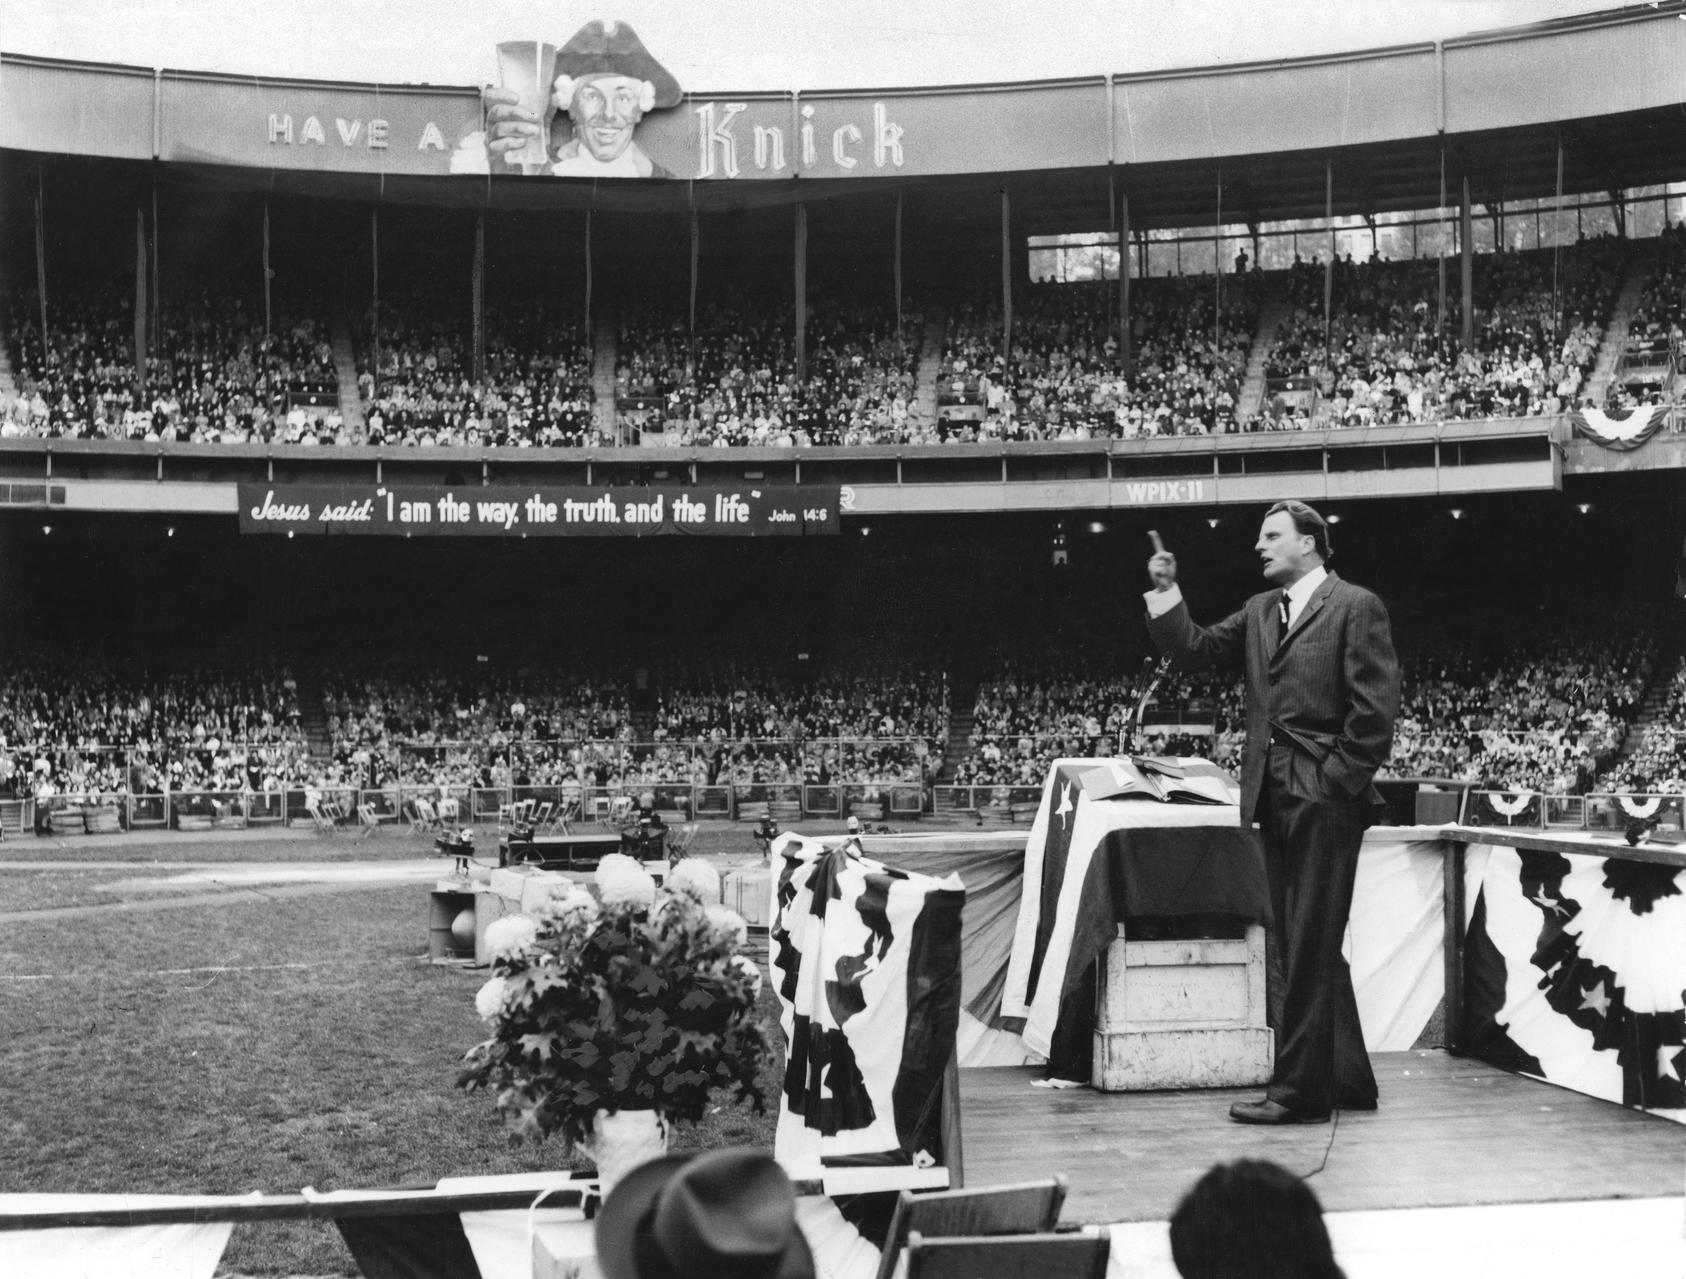 Reverend Billy Graham standing on a pulpit preaching to a stadium crowd. Photo courtesy of Allyn Baum and The New York Times